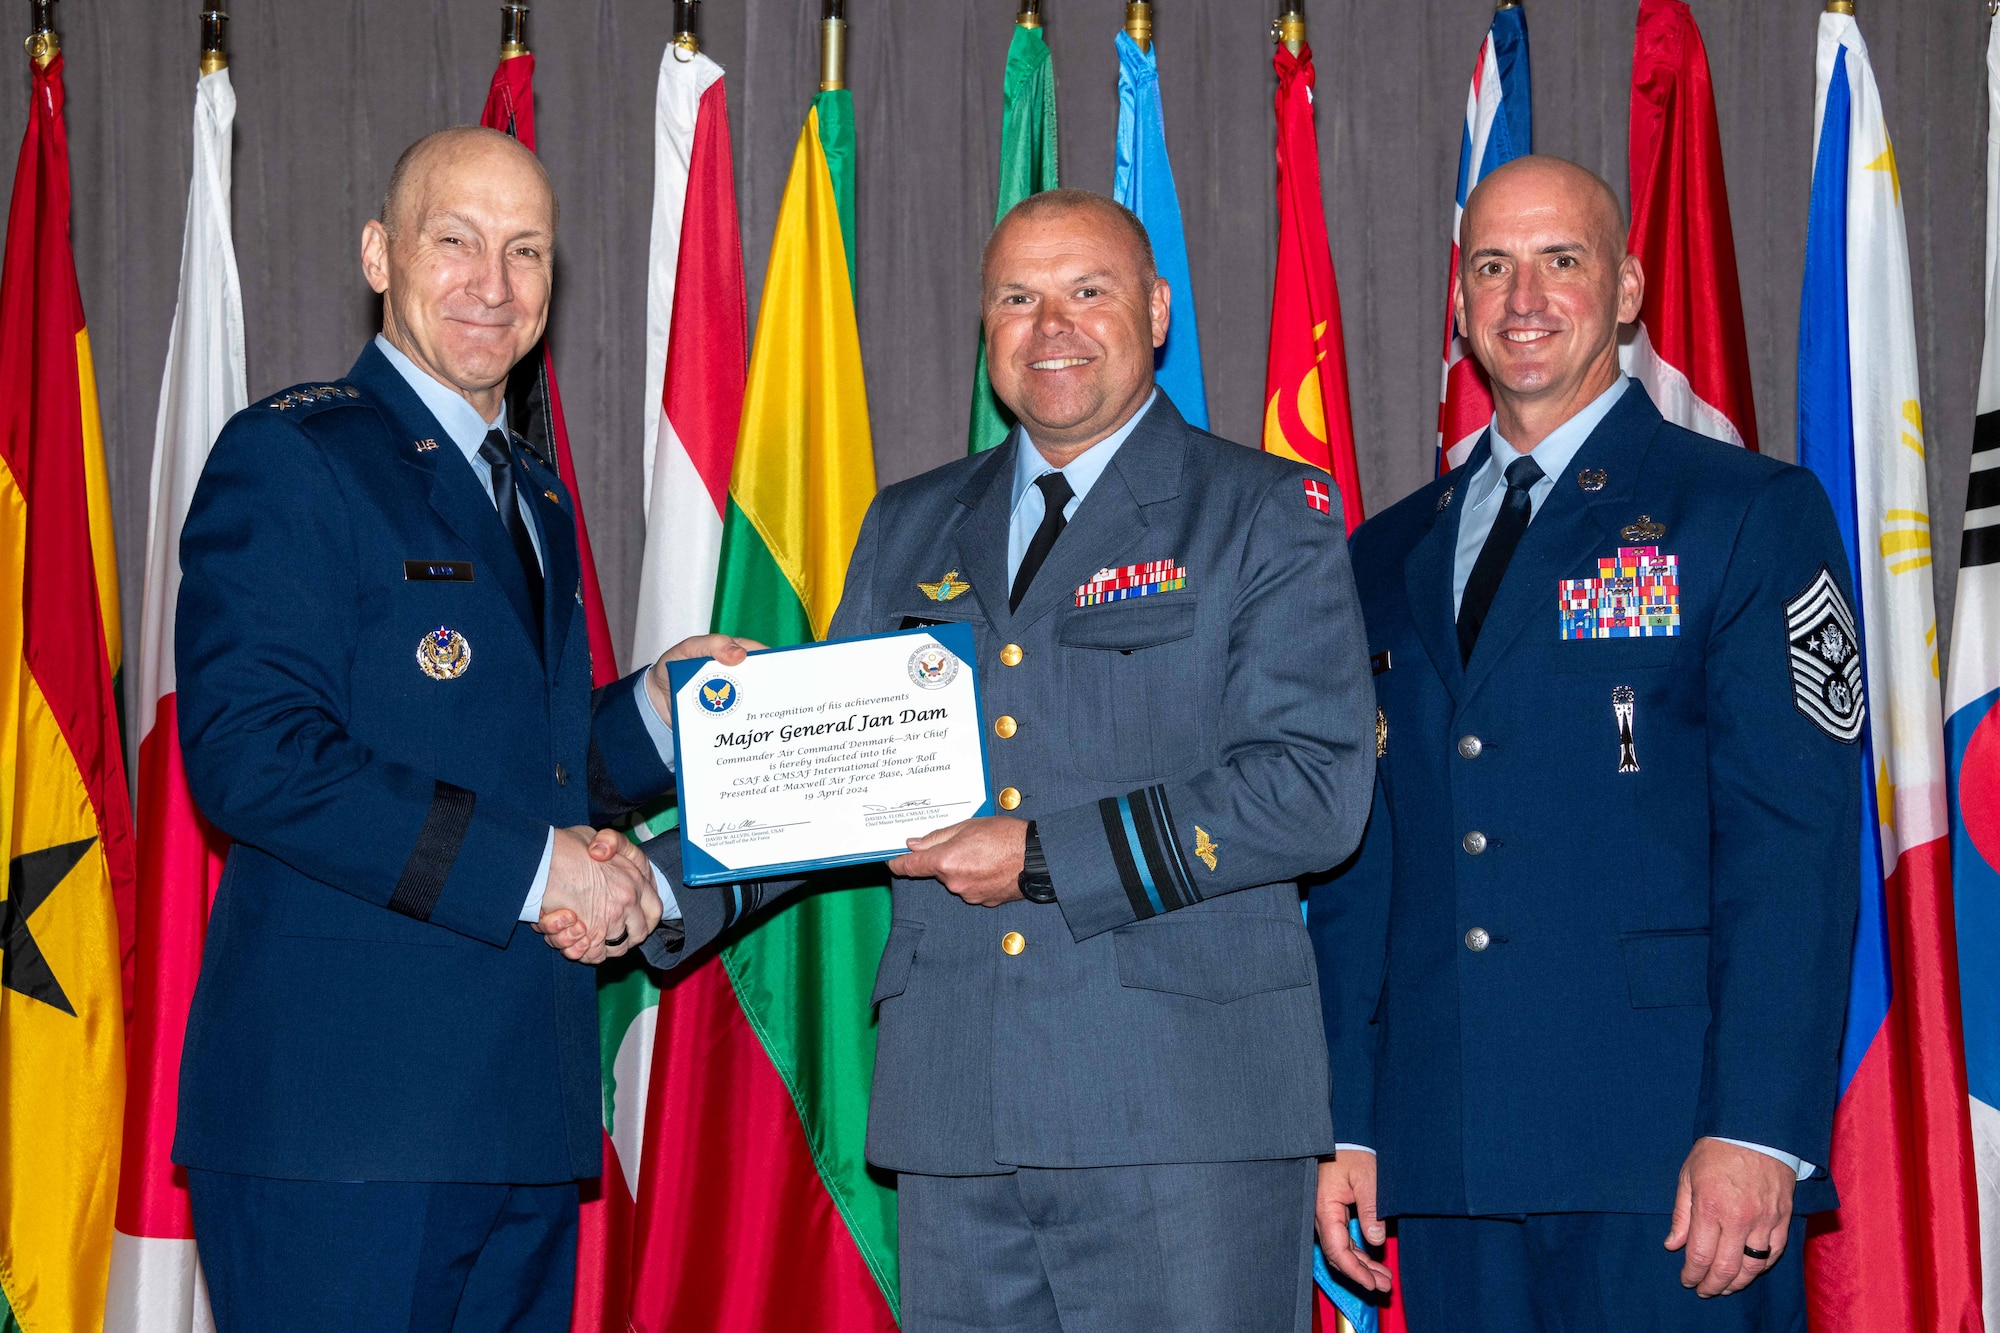 Air Force Chief of Staff Gen. David Allvin and Chief Master Sergeant of the Air Force David Flosi induct Maj. Gen. Jan Dam, Commander Air Command Denmark, into the 2024 CSAF & CMSAF International Honor Roll at Maxwell Air Force Base, Ala., Apr. 19, 2024. International Honor Roll recognizes former Air University students who rose to the equivalent level of Chief of Staff or higher or Chief Master Sergeant of the Air Force or higher in their respective services. (US Air Force photo by Melanie Rodgers Cox)